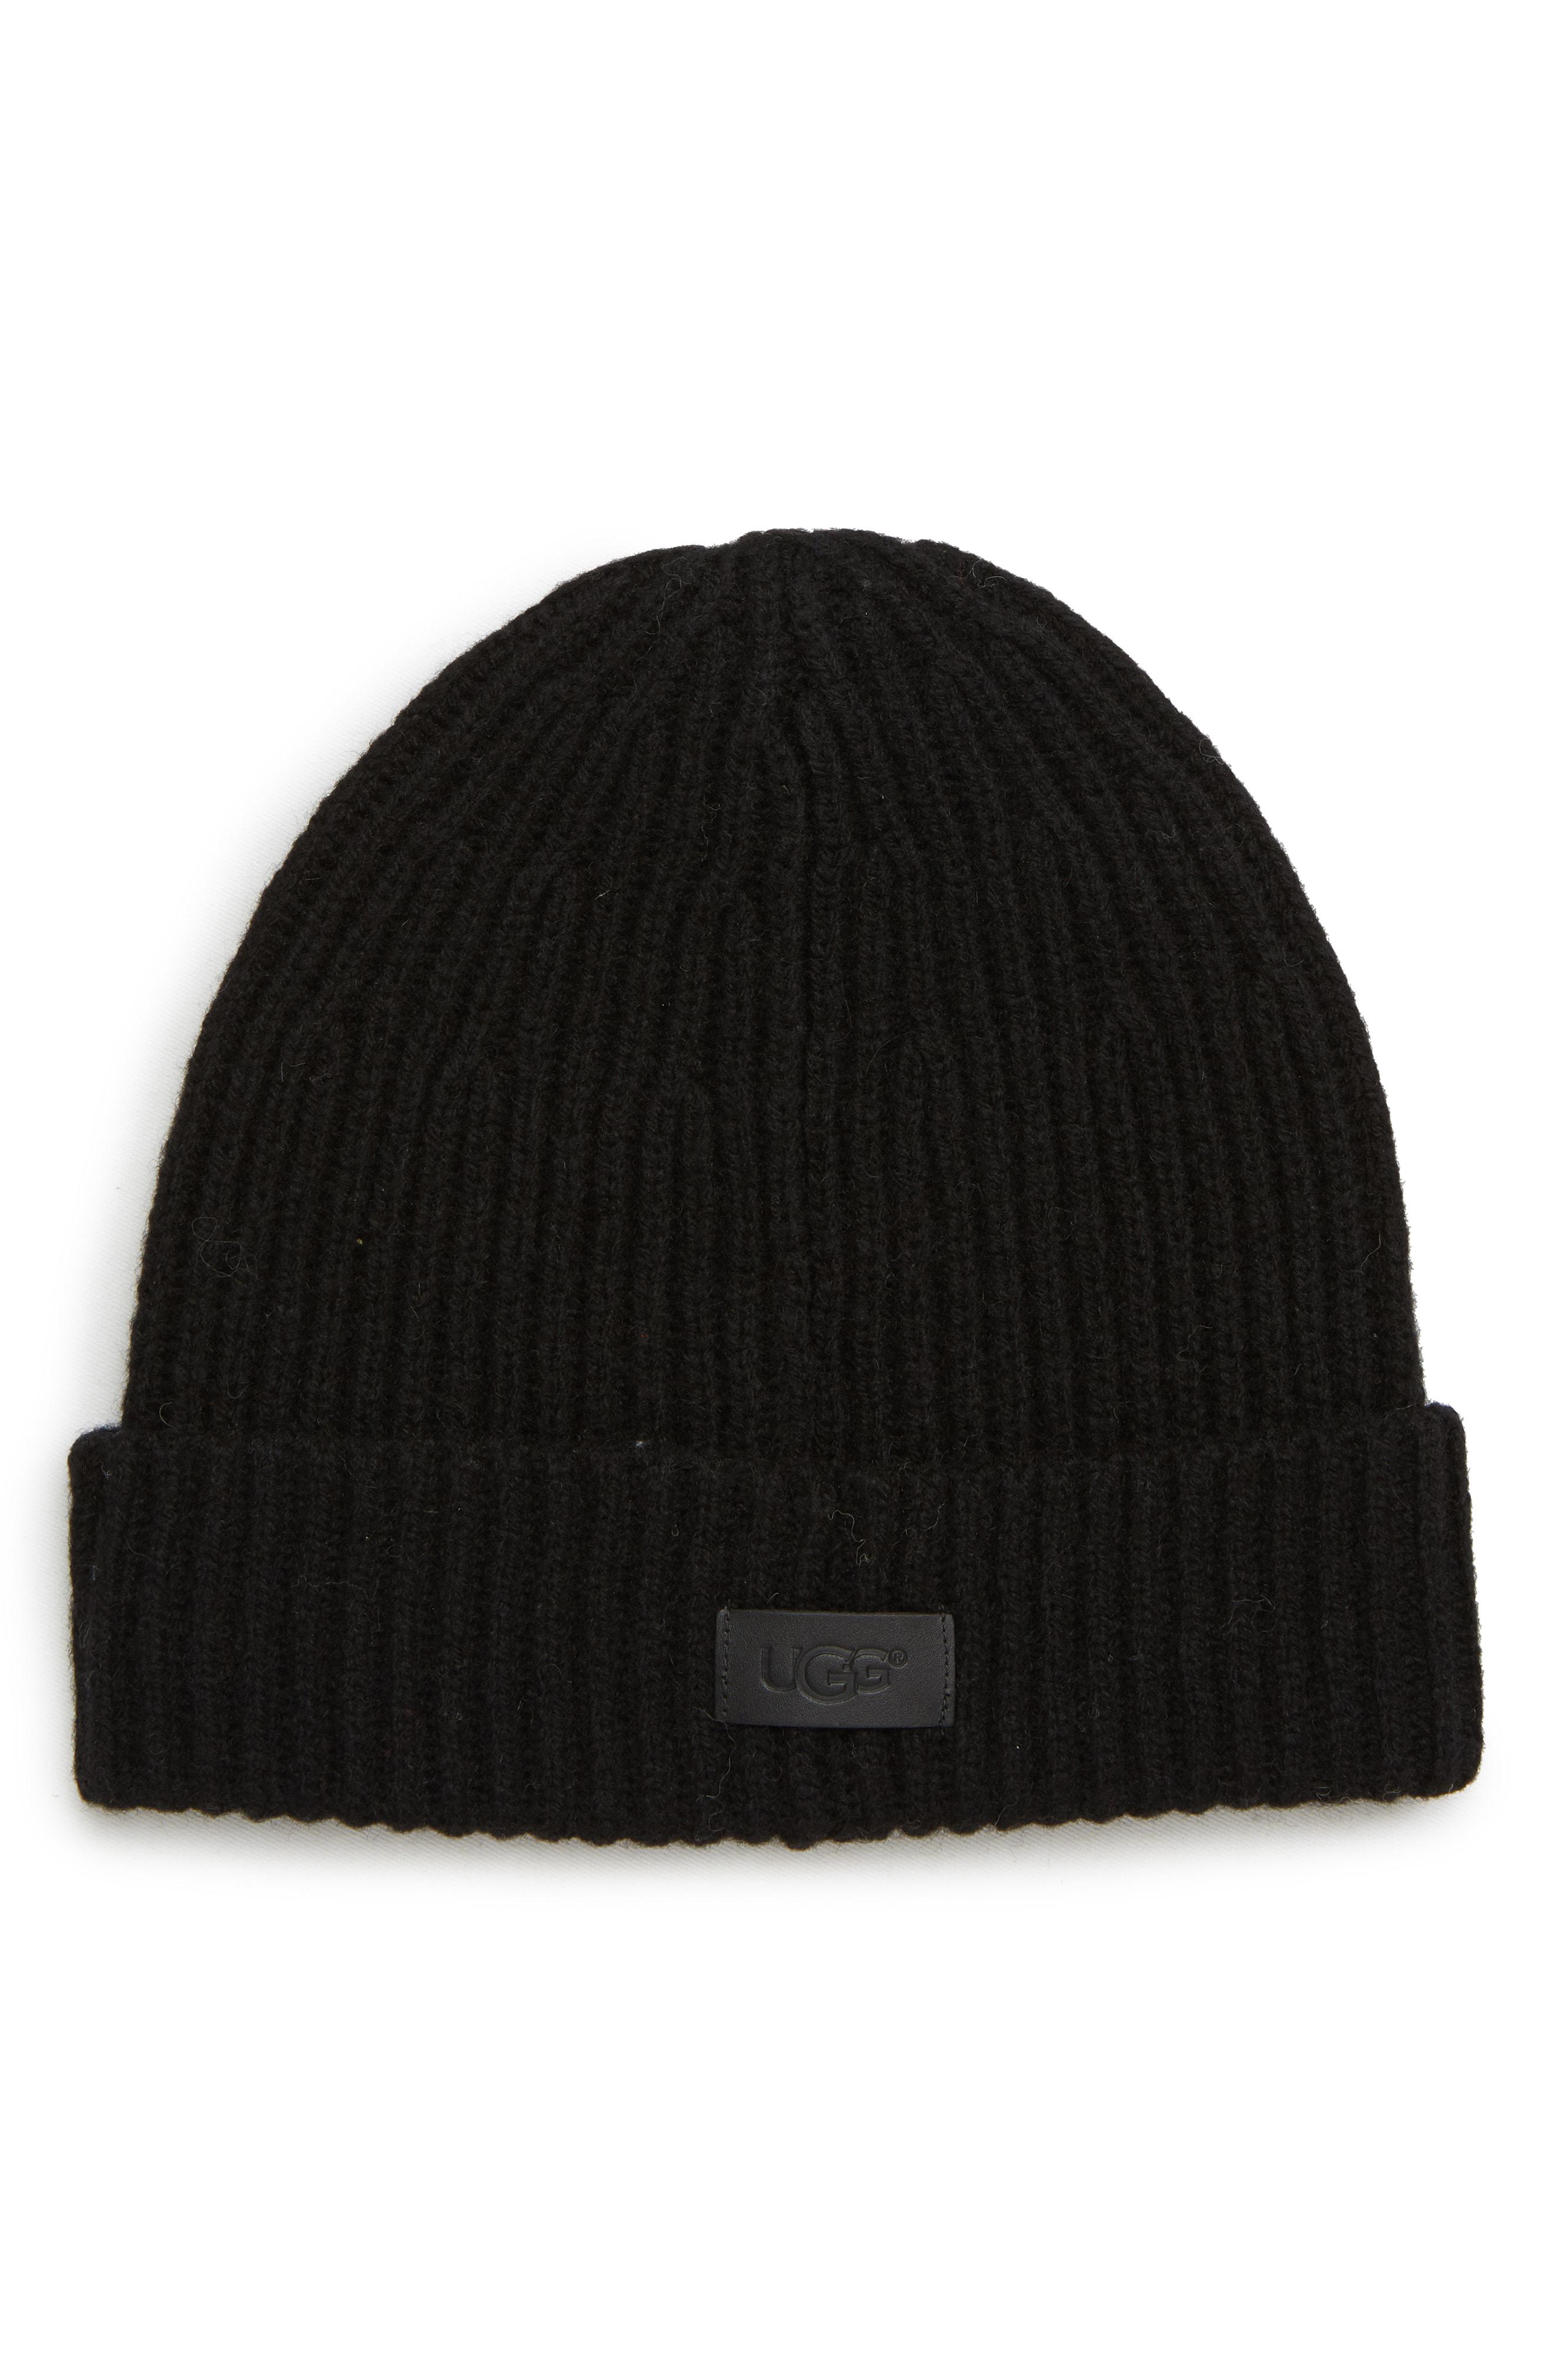 UGG Ugg Cuffed Knit Beanie in Black for 